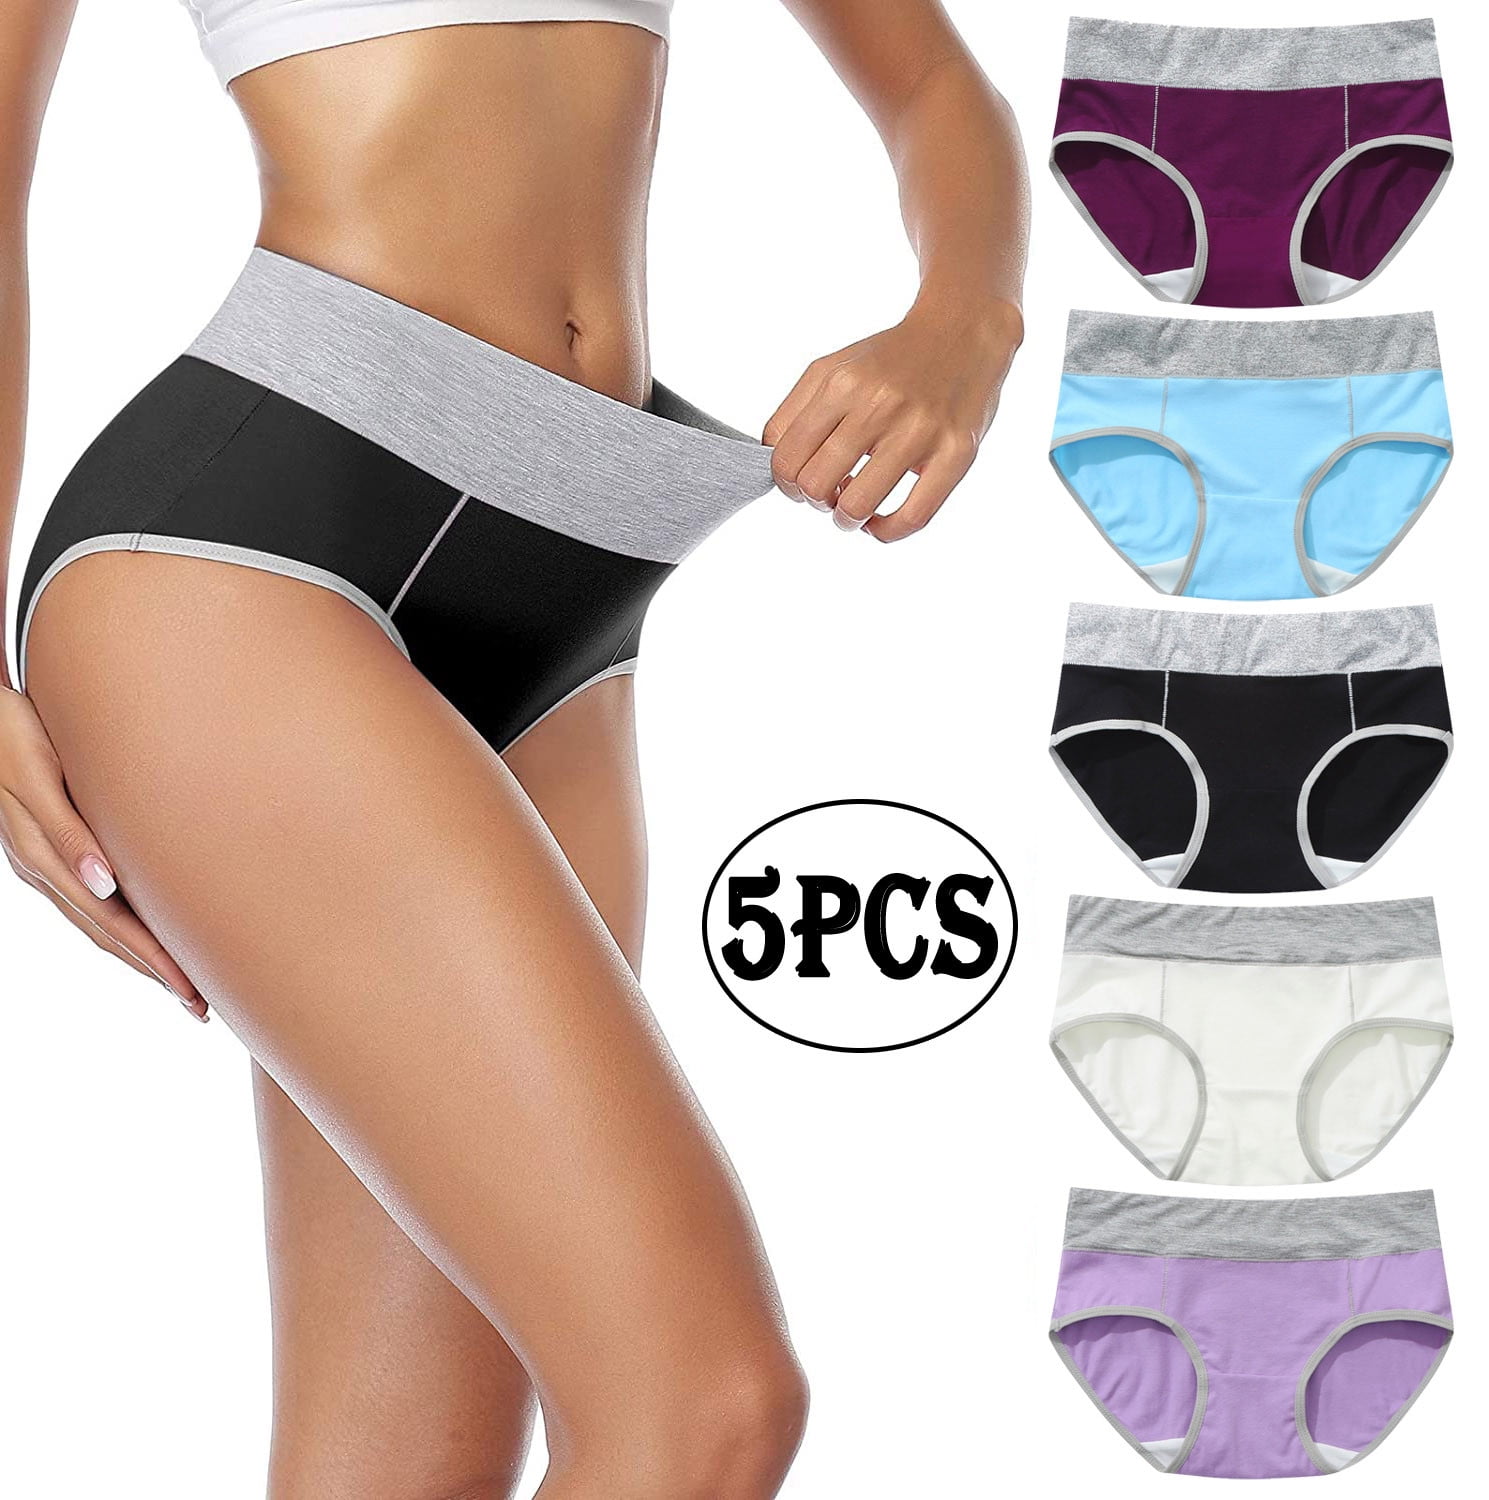 Kayannuo Cotton Underwear For Women Back to School Clearance 5PC